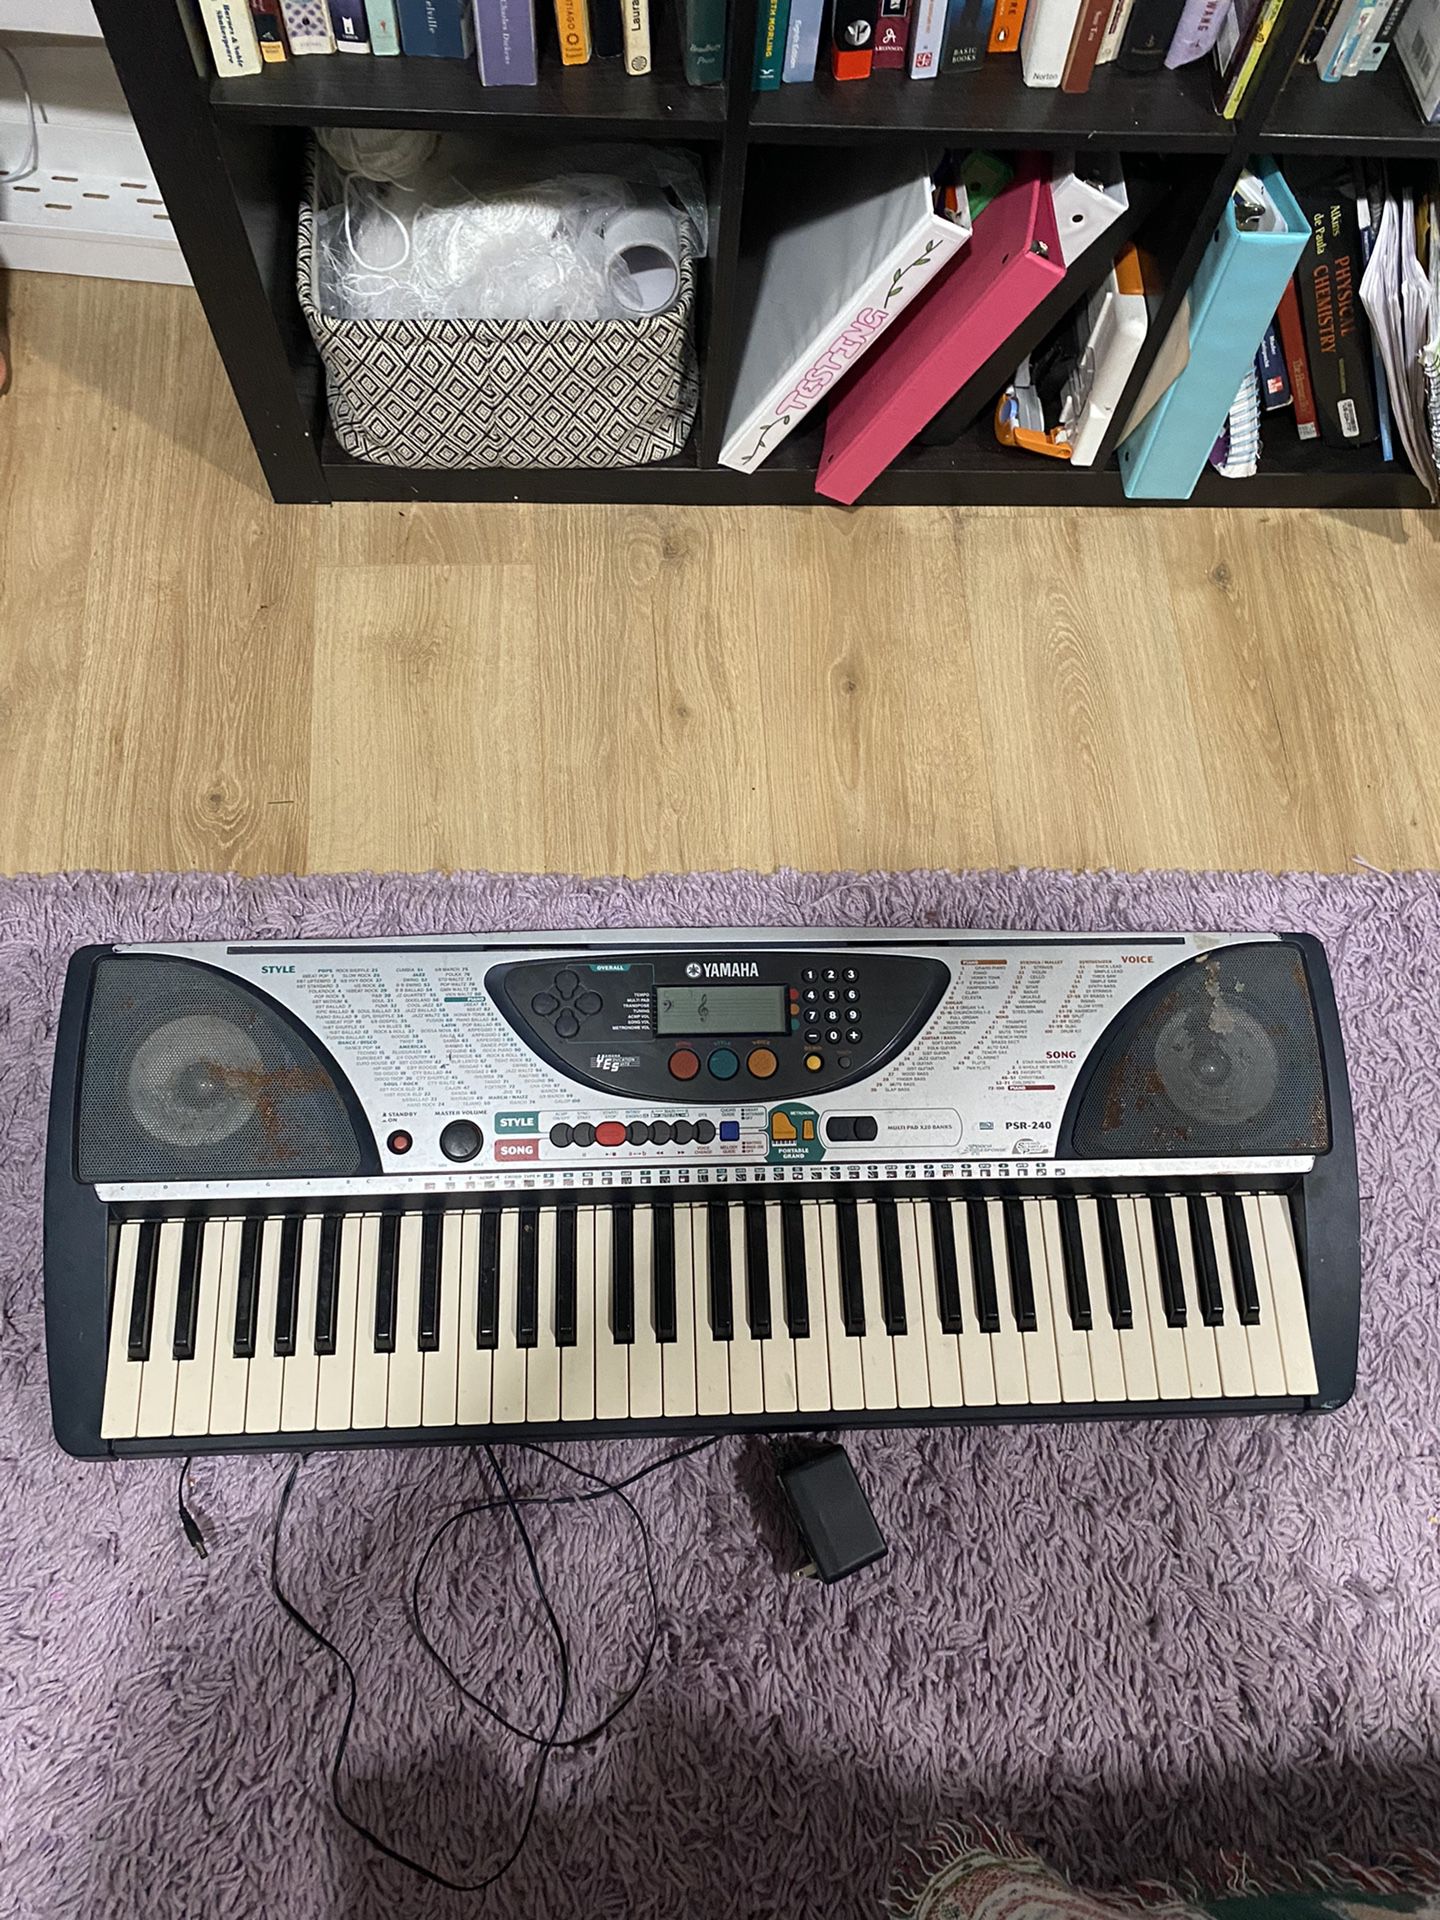 Yamaha Keyboard For Parts- Cord Included, No Battery- Price Negotiable